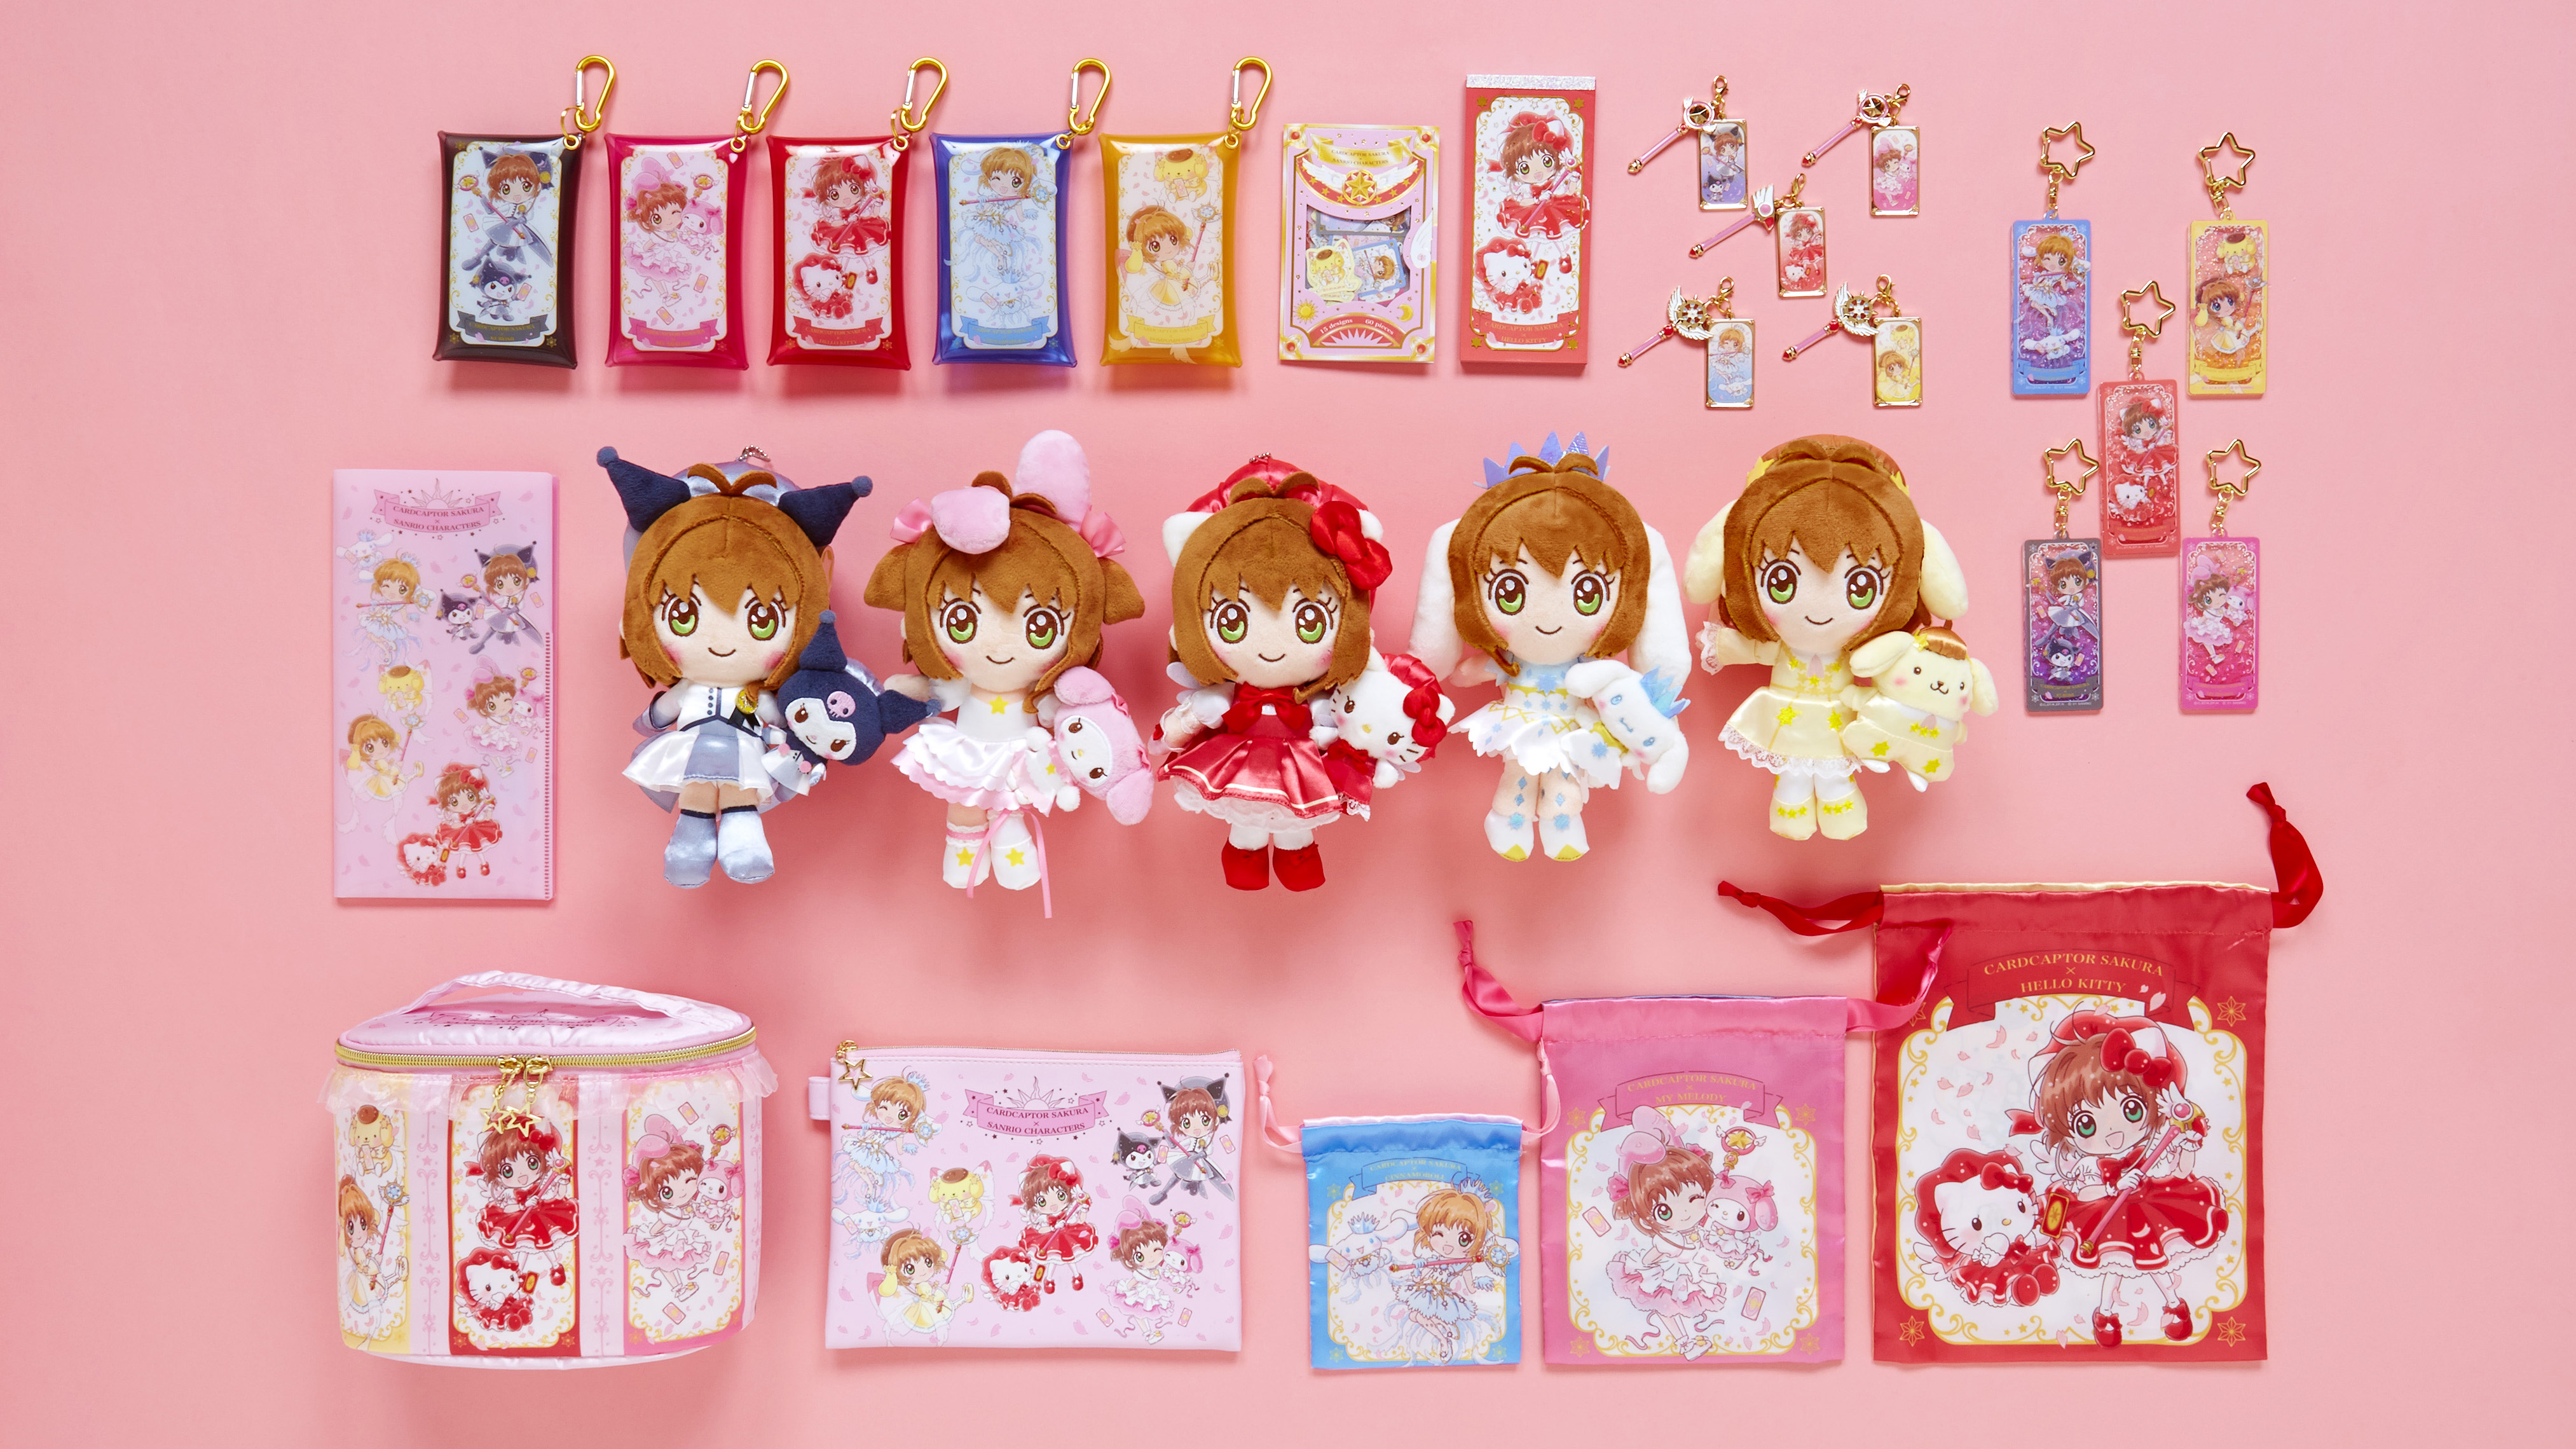 Capsule Toy All 5 Sets Cardcaptor Sakura × Sanrio Characters Special Complete